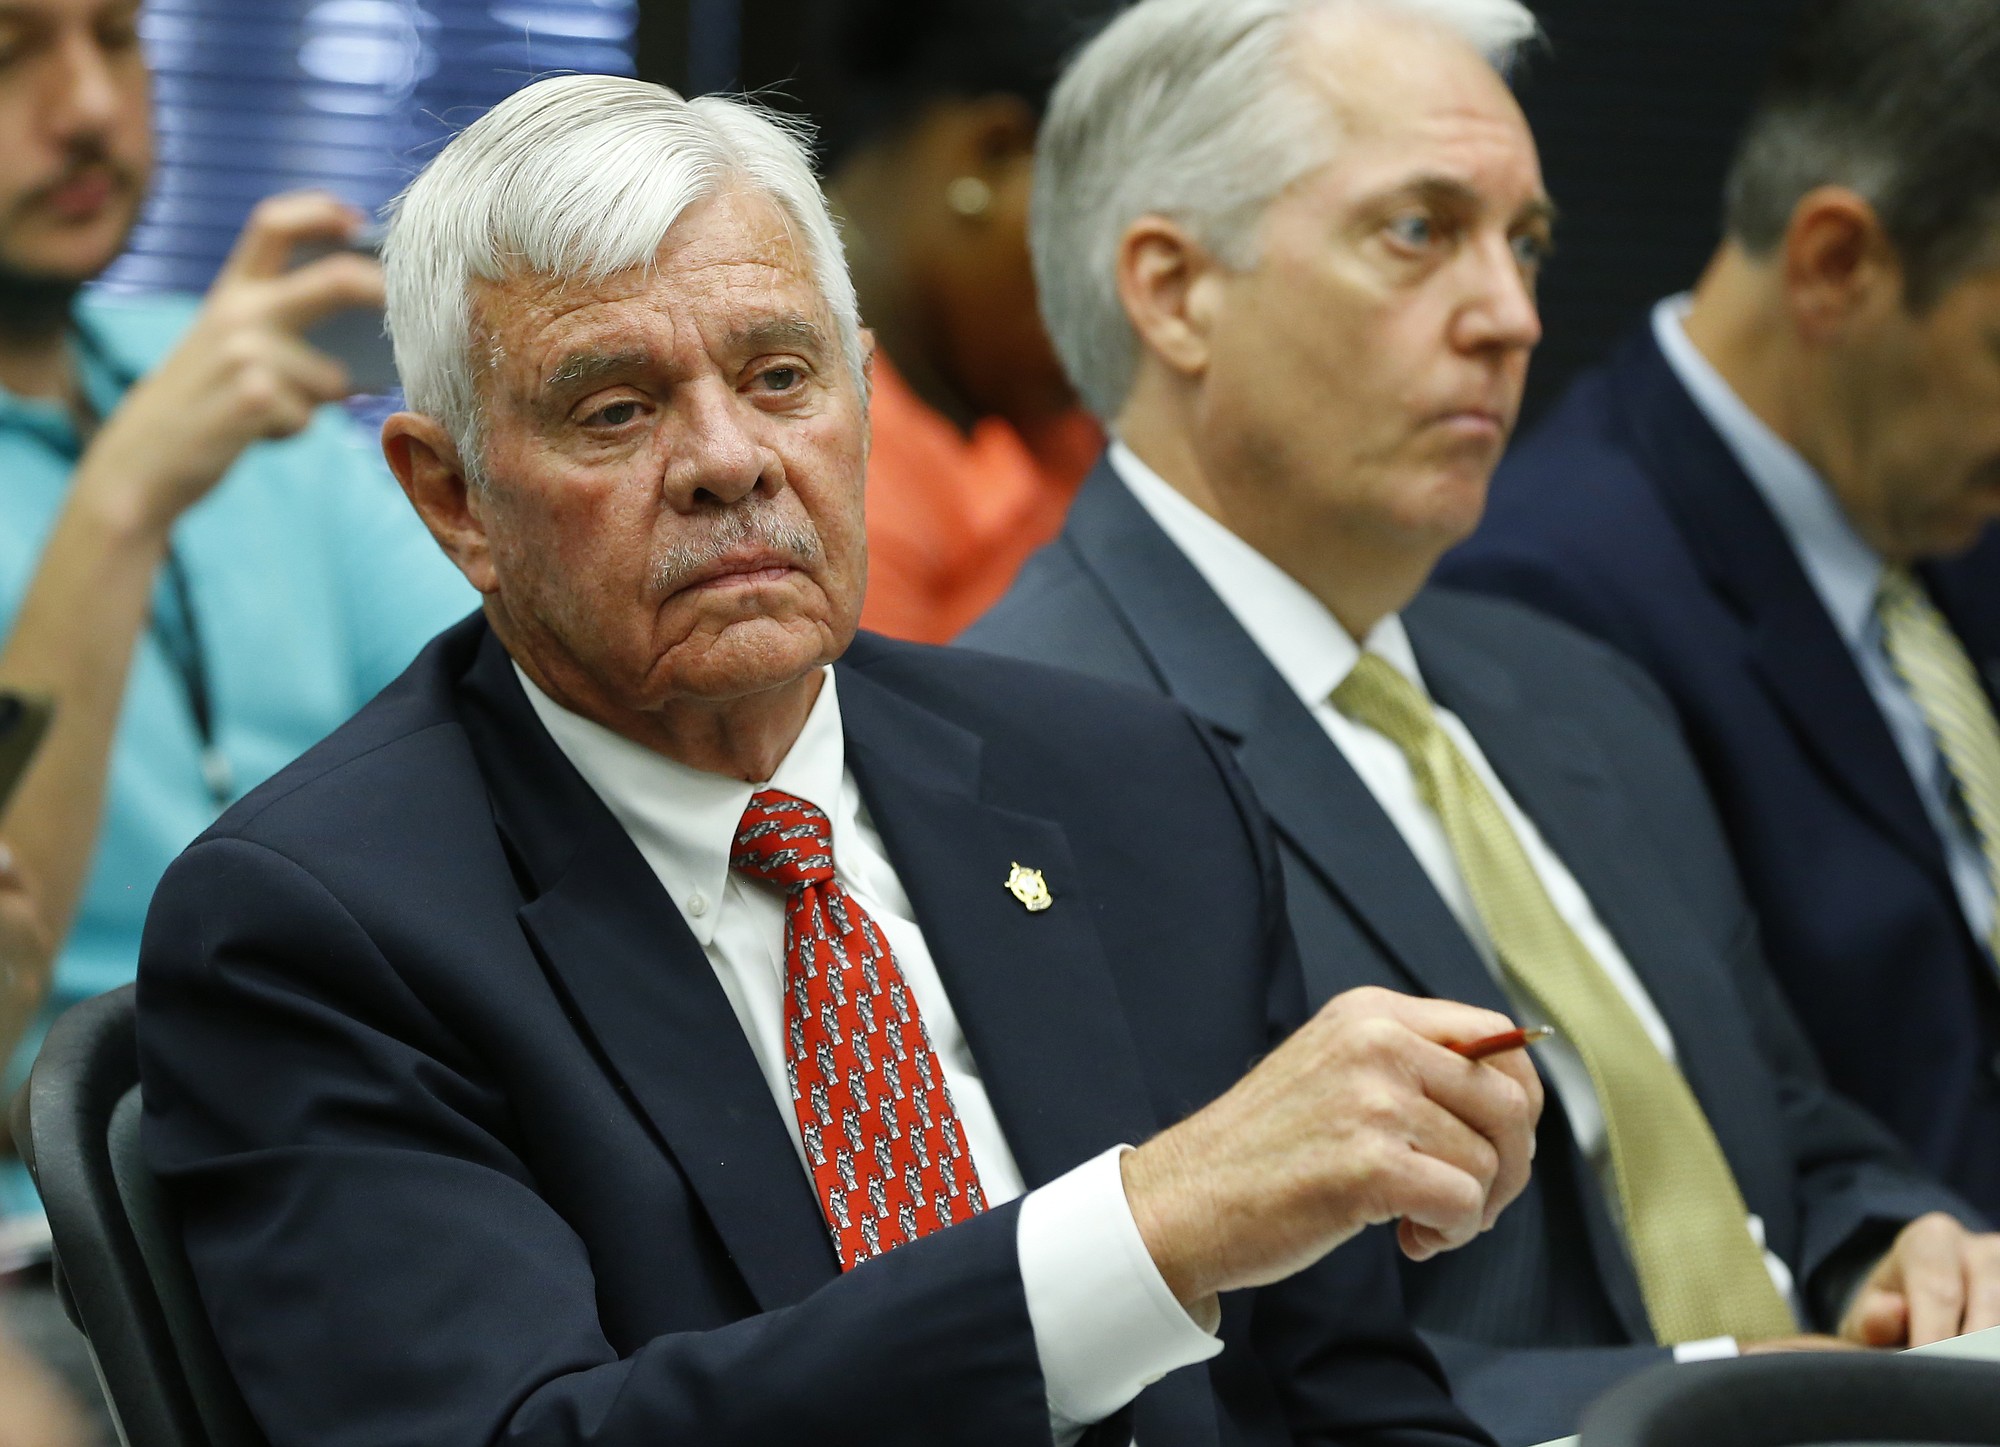 Tulsa County Sheriff Stanley Glanz listens to July 13  proceedings of a county commissioners meeting in Tulsa, Okla.